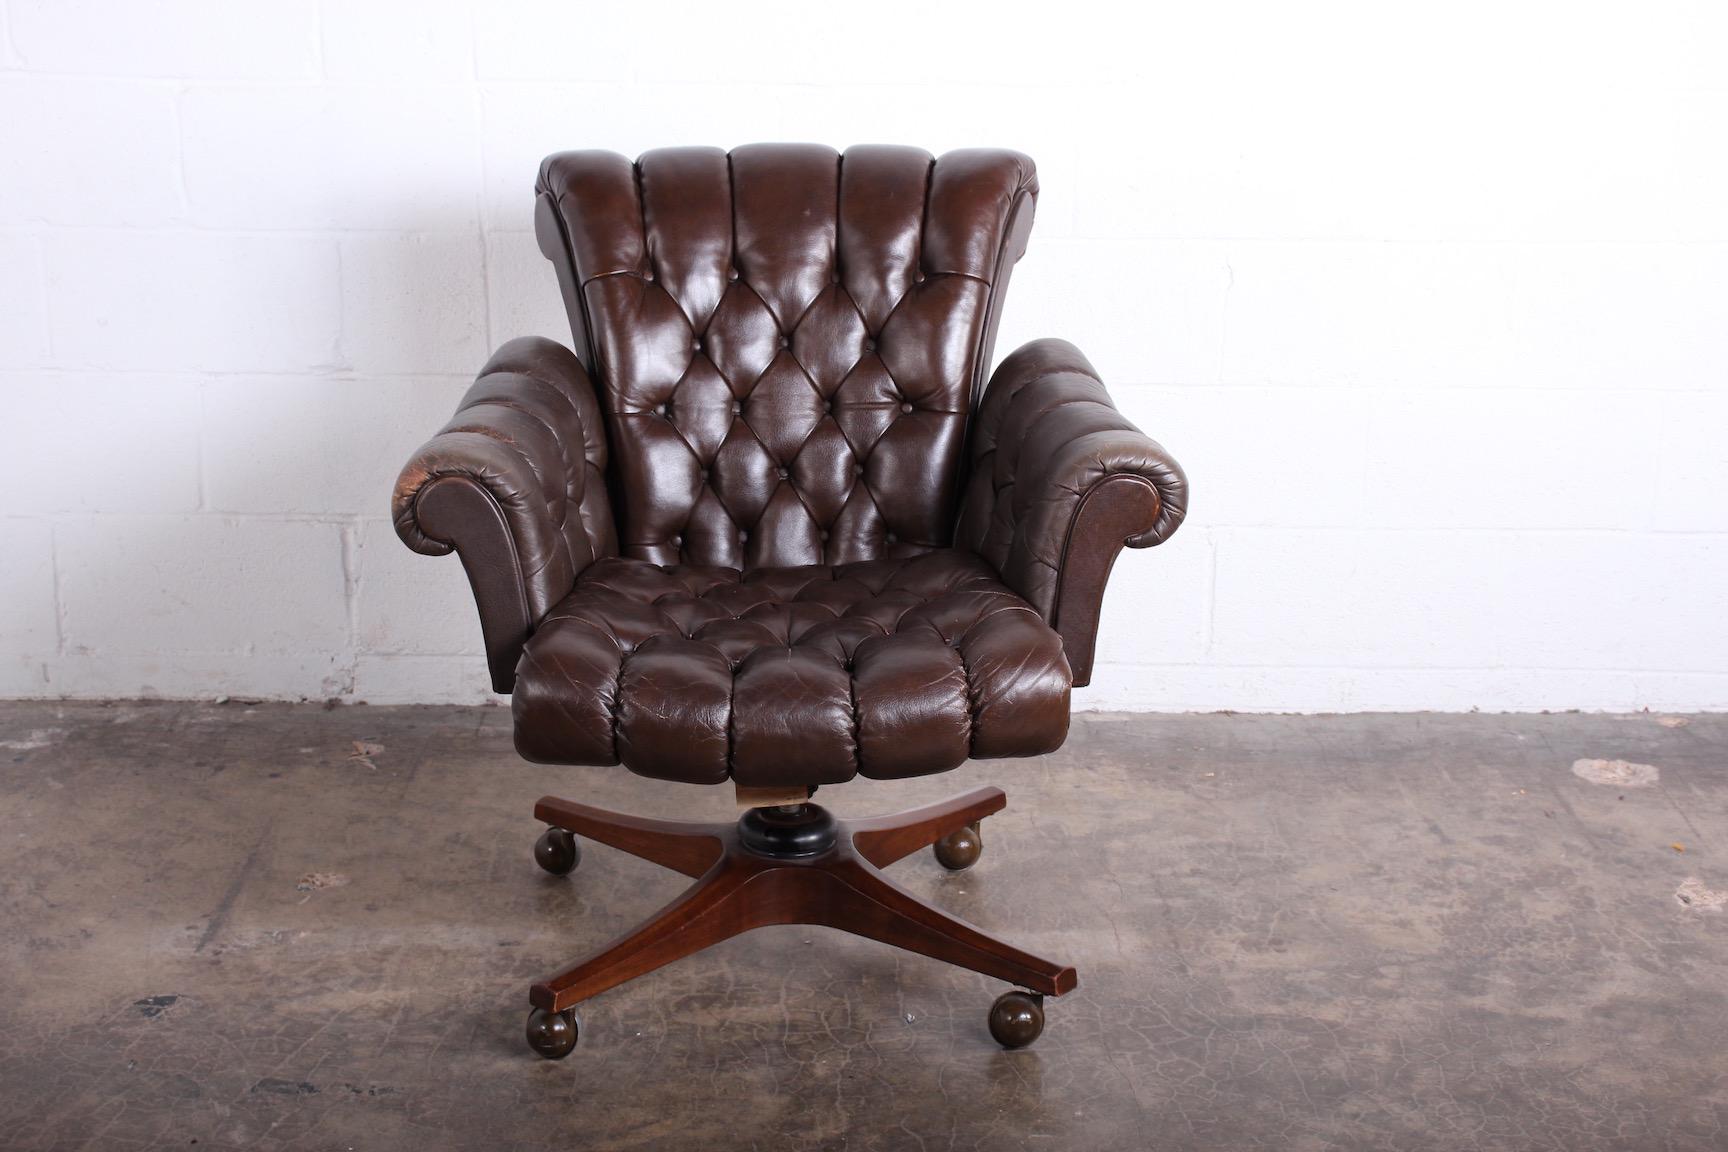 A leather desk chair designed by Edward Wormley for Dunbar. Adjustable height and tilting back.